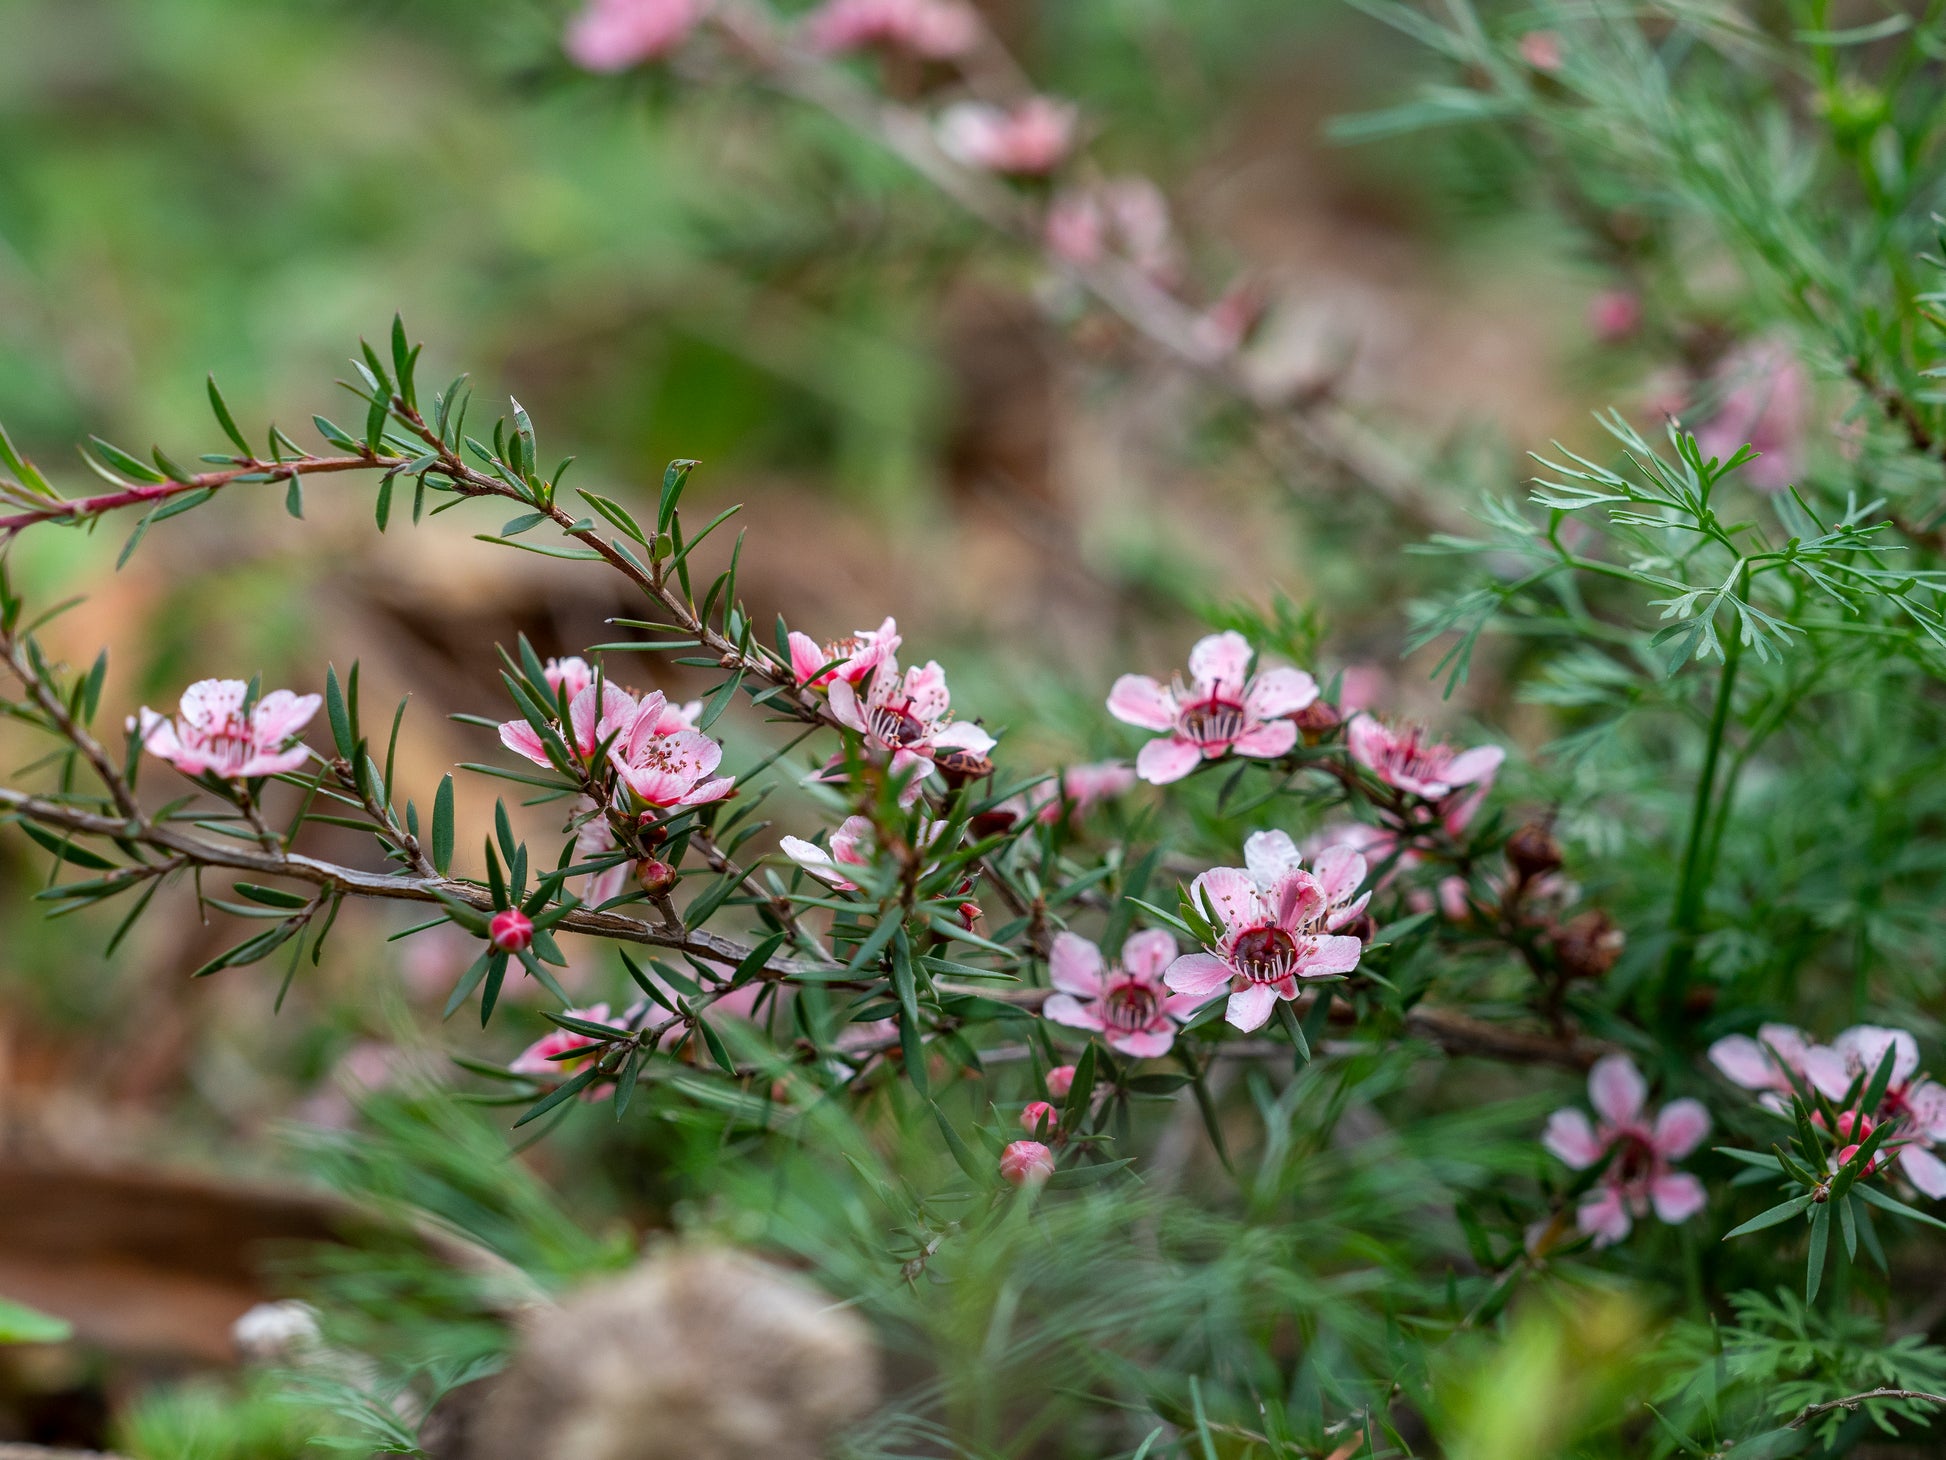 Small pink flowers and slender green leaves of the Leptospermum Pink Cascade